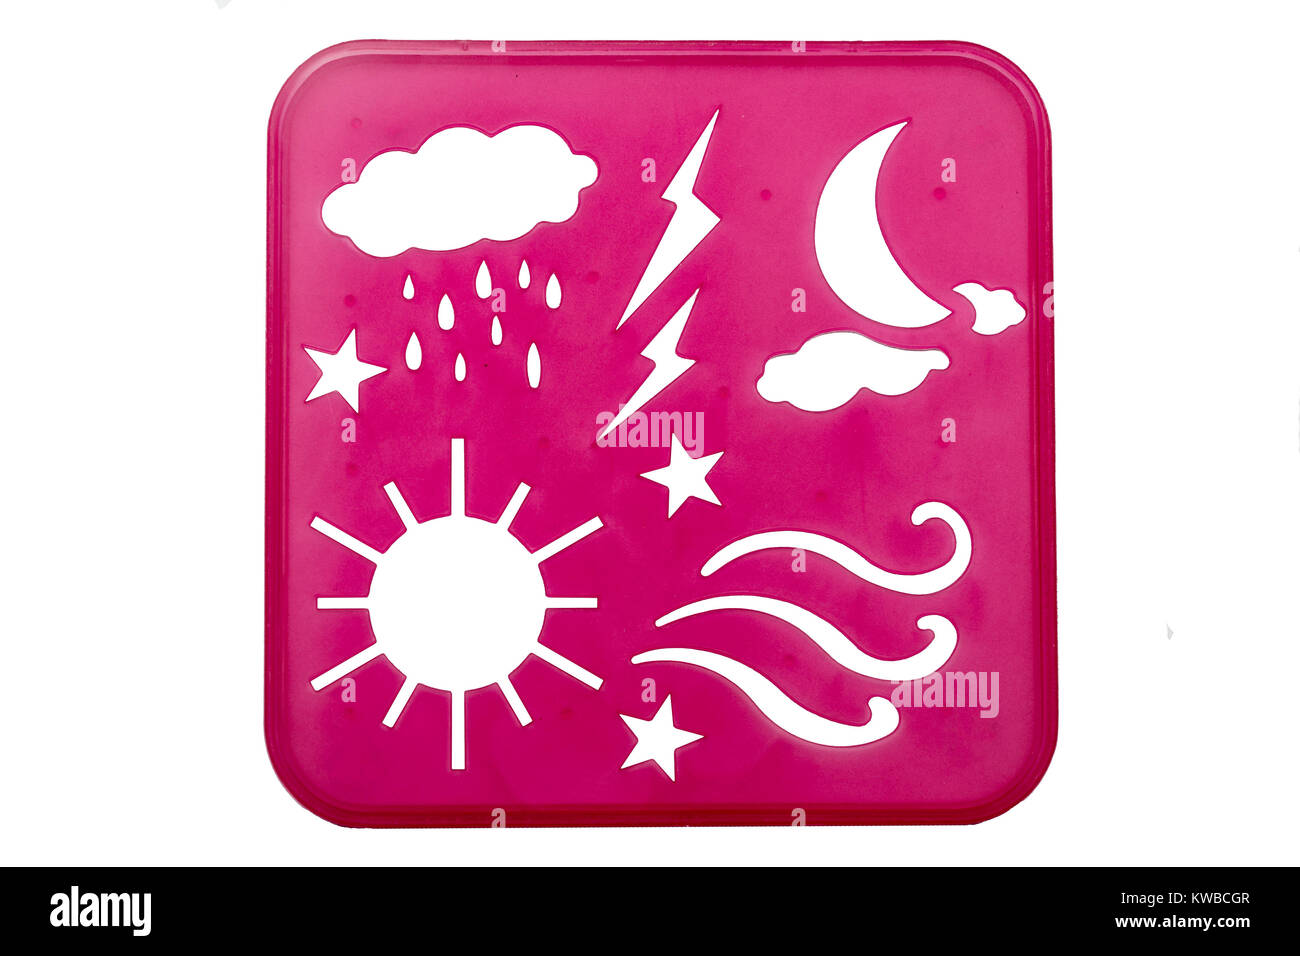 Weather stencil shapes on a pink background Stock Photo